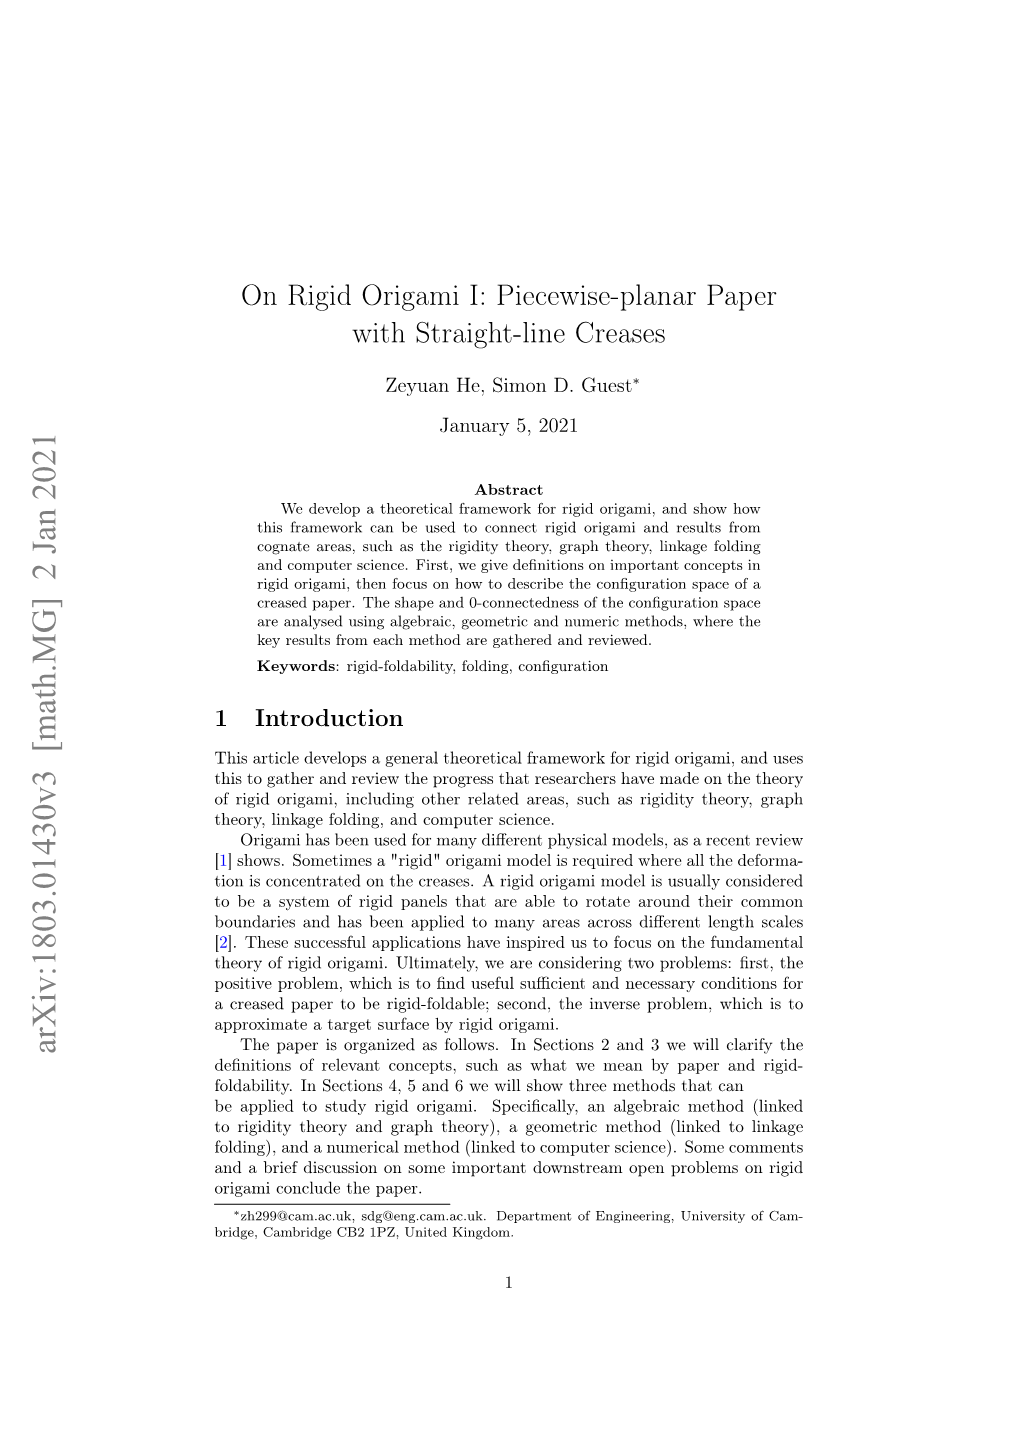 On Rigid Origami I: Piecewise-Planar Paper with Straight-Line Creases